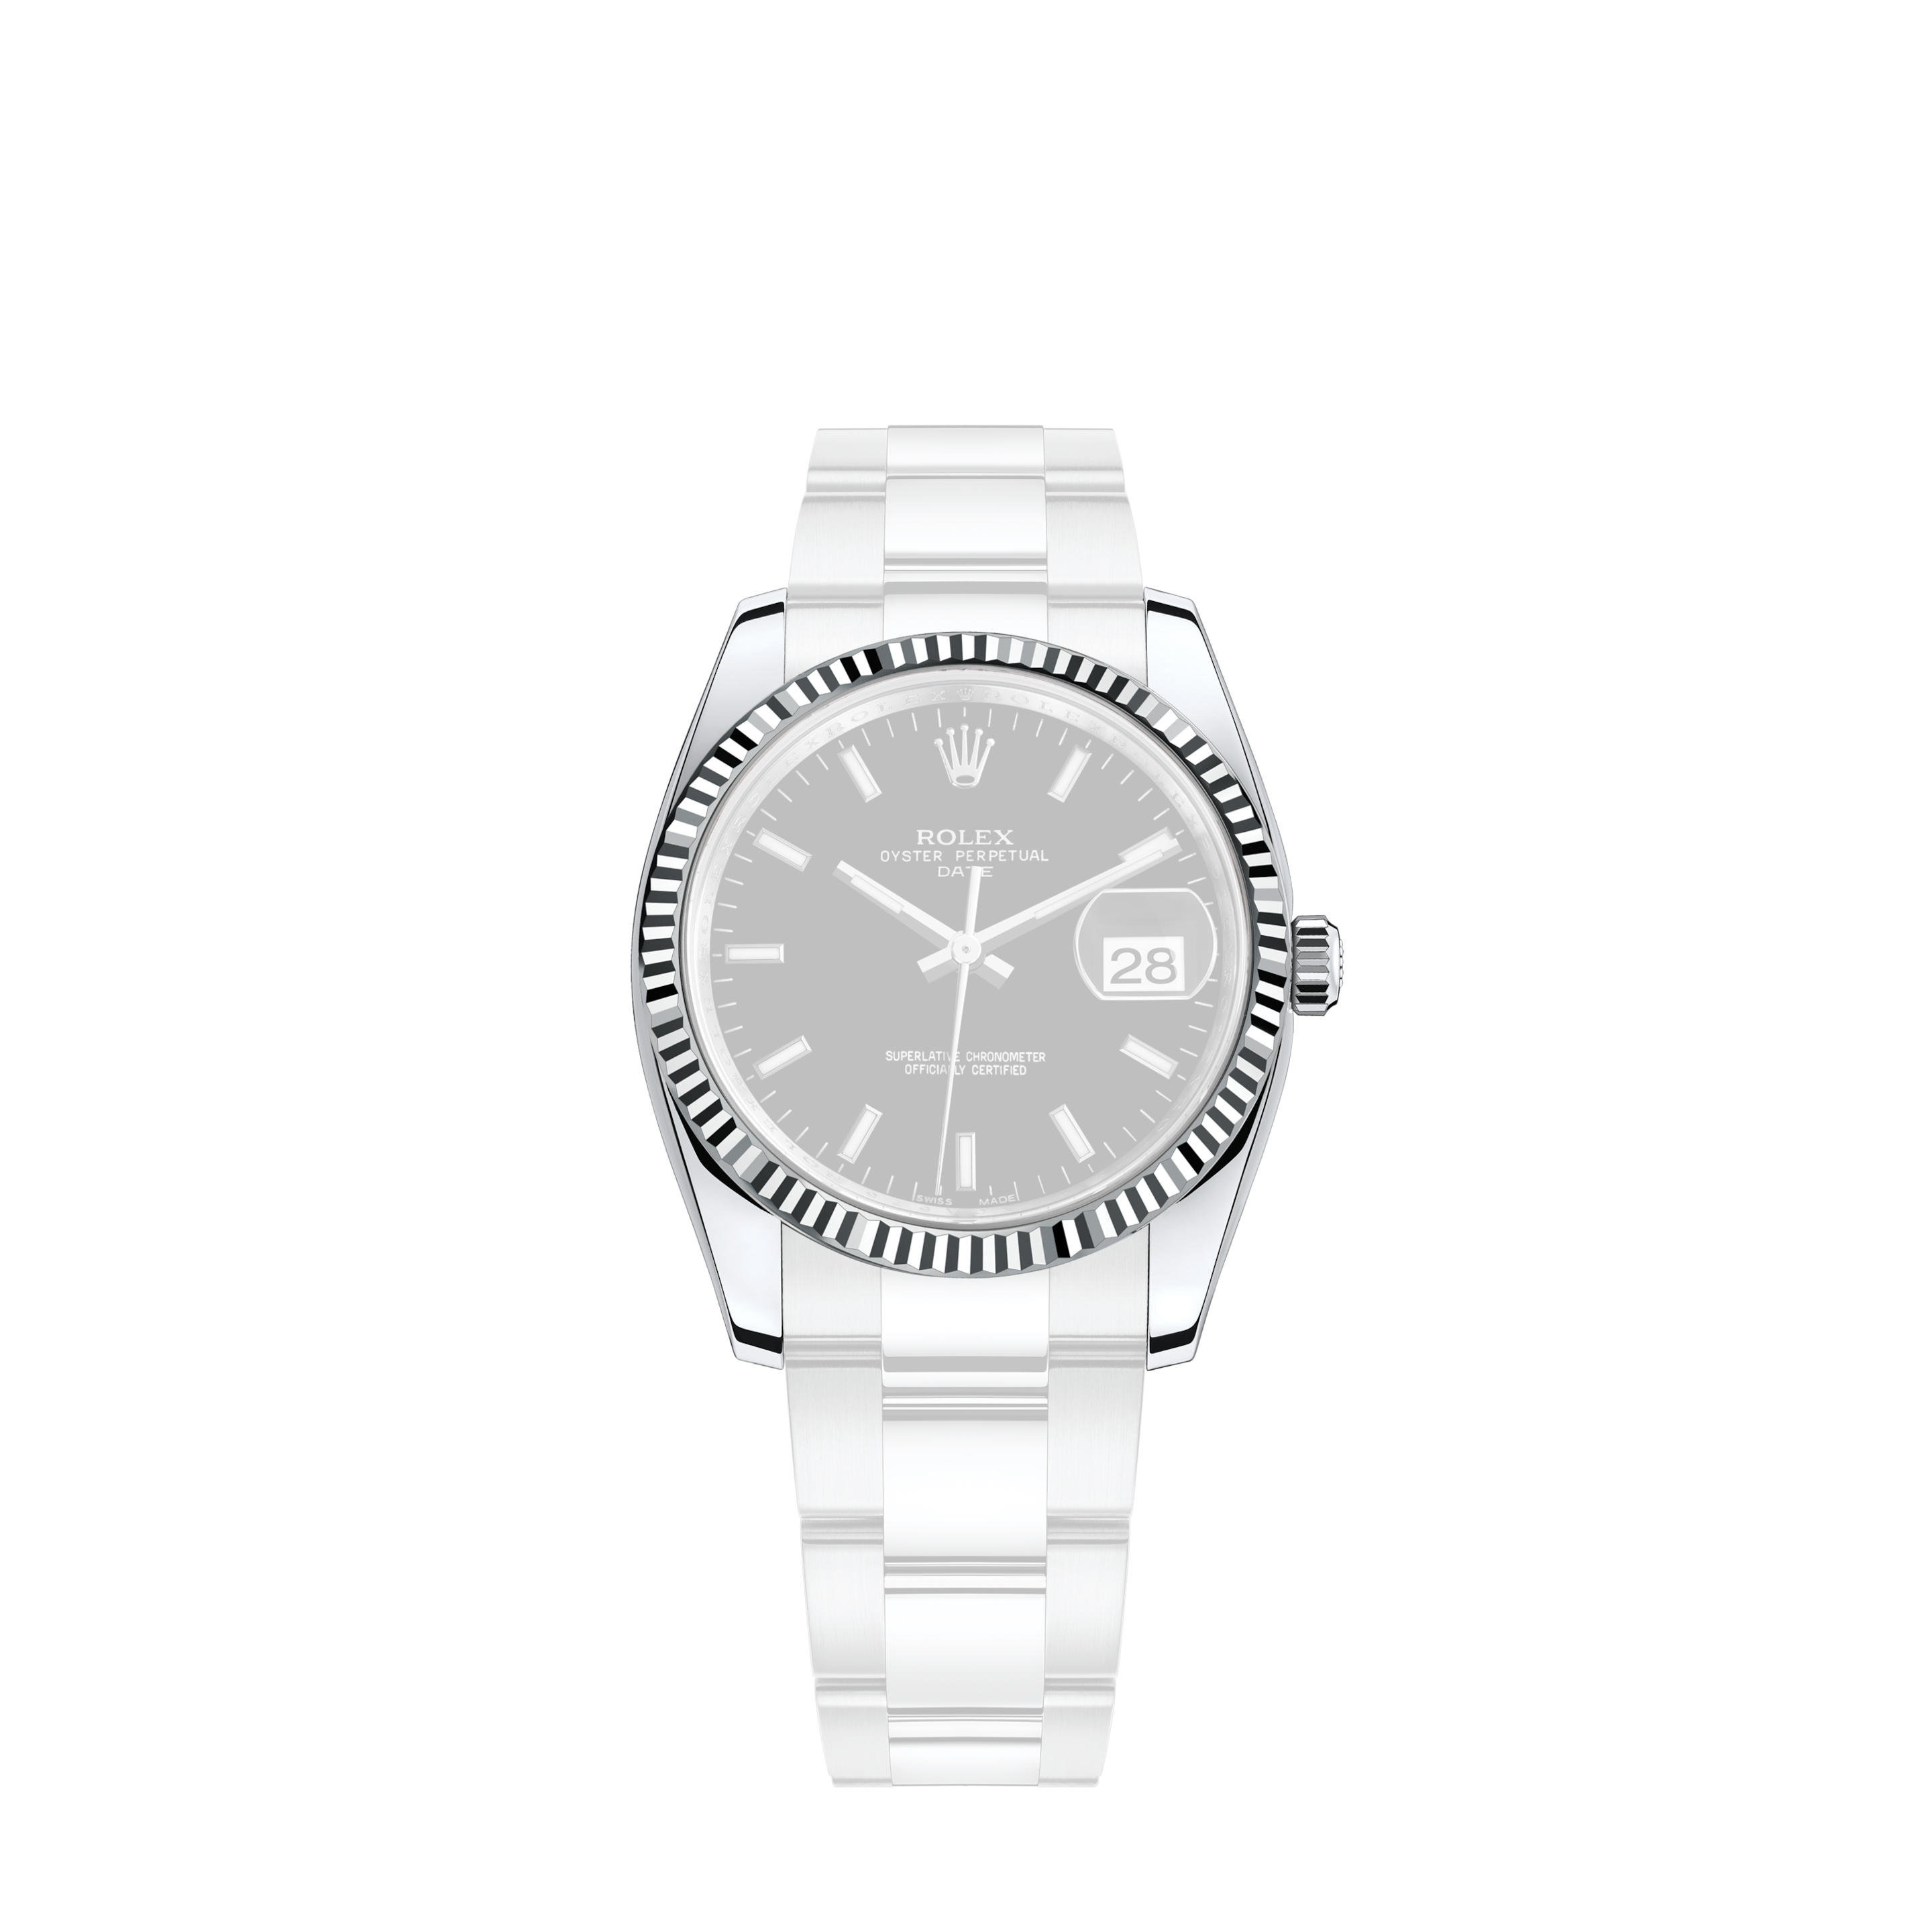 Rolex Women's Datejust Midsize Stainless Steel Silver Roman DialRolex Women's Datejust Midsize Stainless Steel White Index Dial